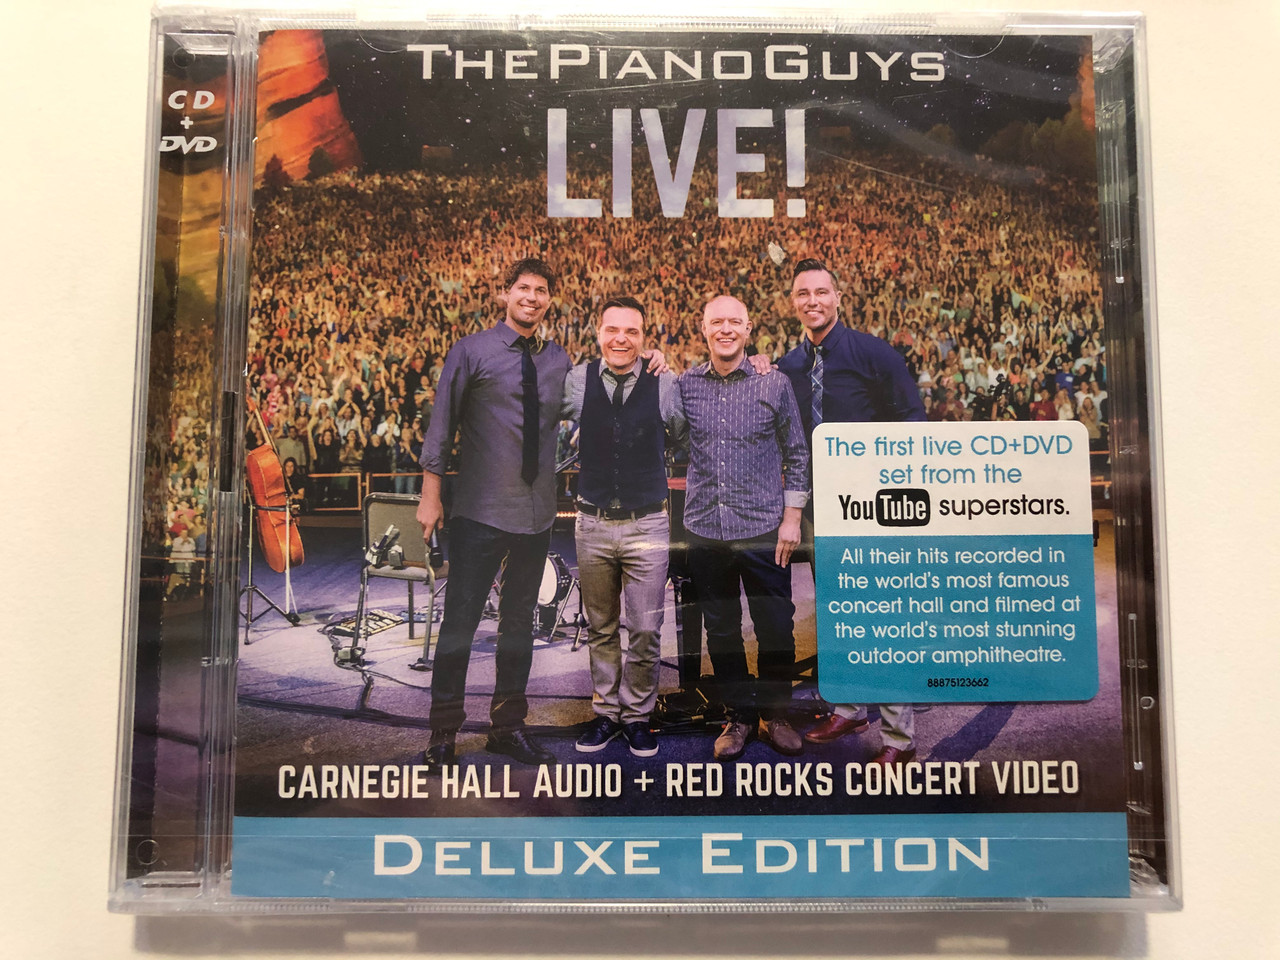 https://cdn10.bigcommerce.com/s-62bdpkt7pb/products/29470/images/175686/The_Piano_Guys_Live_Carnegie_Hall_Audio_Red_Rocks_Concert_Video_Deluxe_Edition_The_First_Live_CD_DVD_set_from_the_YouTube_Superstar_Portrait_Audio_CD_DVD_2015_88875123662_1__99242.1618907808.1280.1280.JPG?c=2&_ga=2.223542302.425983966.1618922532-1242530367.1618922532